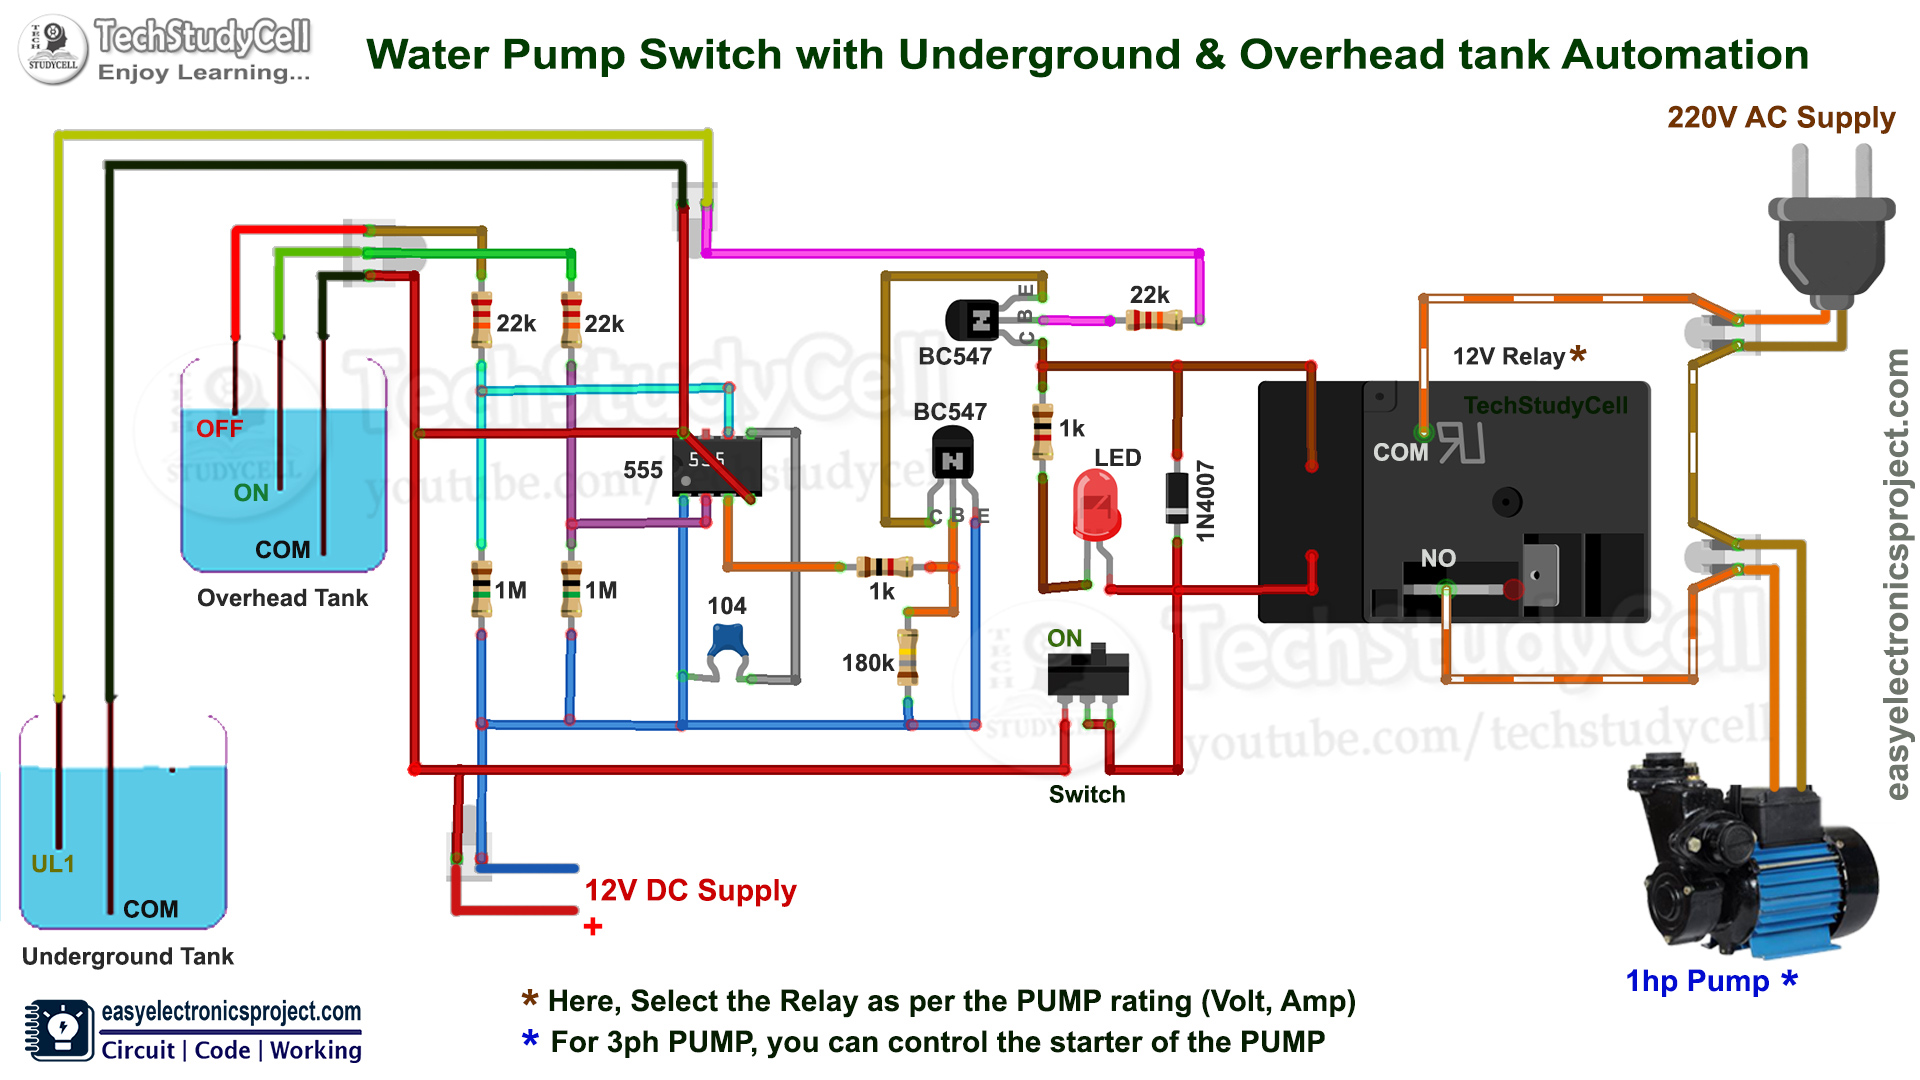 Automatic Water Level Controller for Pump using 555 Timer IC - Hackster.io  Automatic Water Level Controller Wiring Diagram    Hackster.io